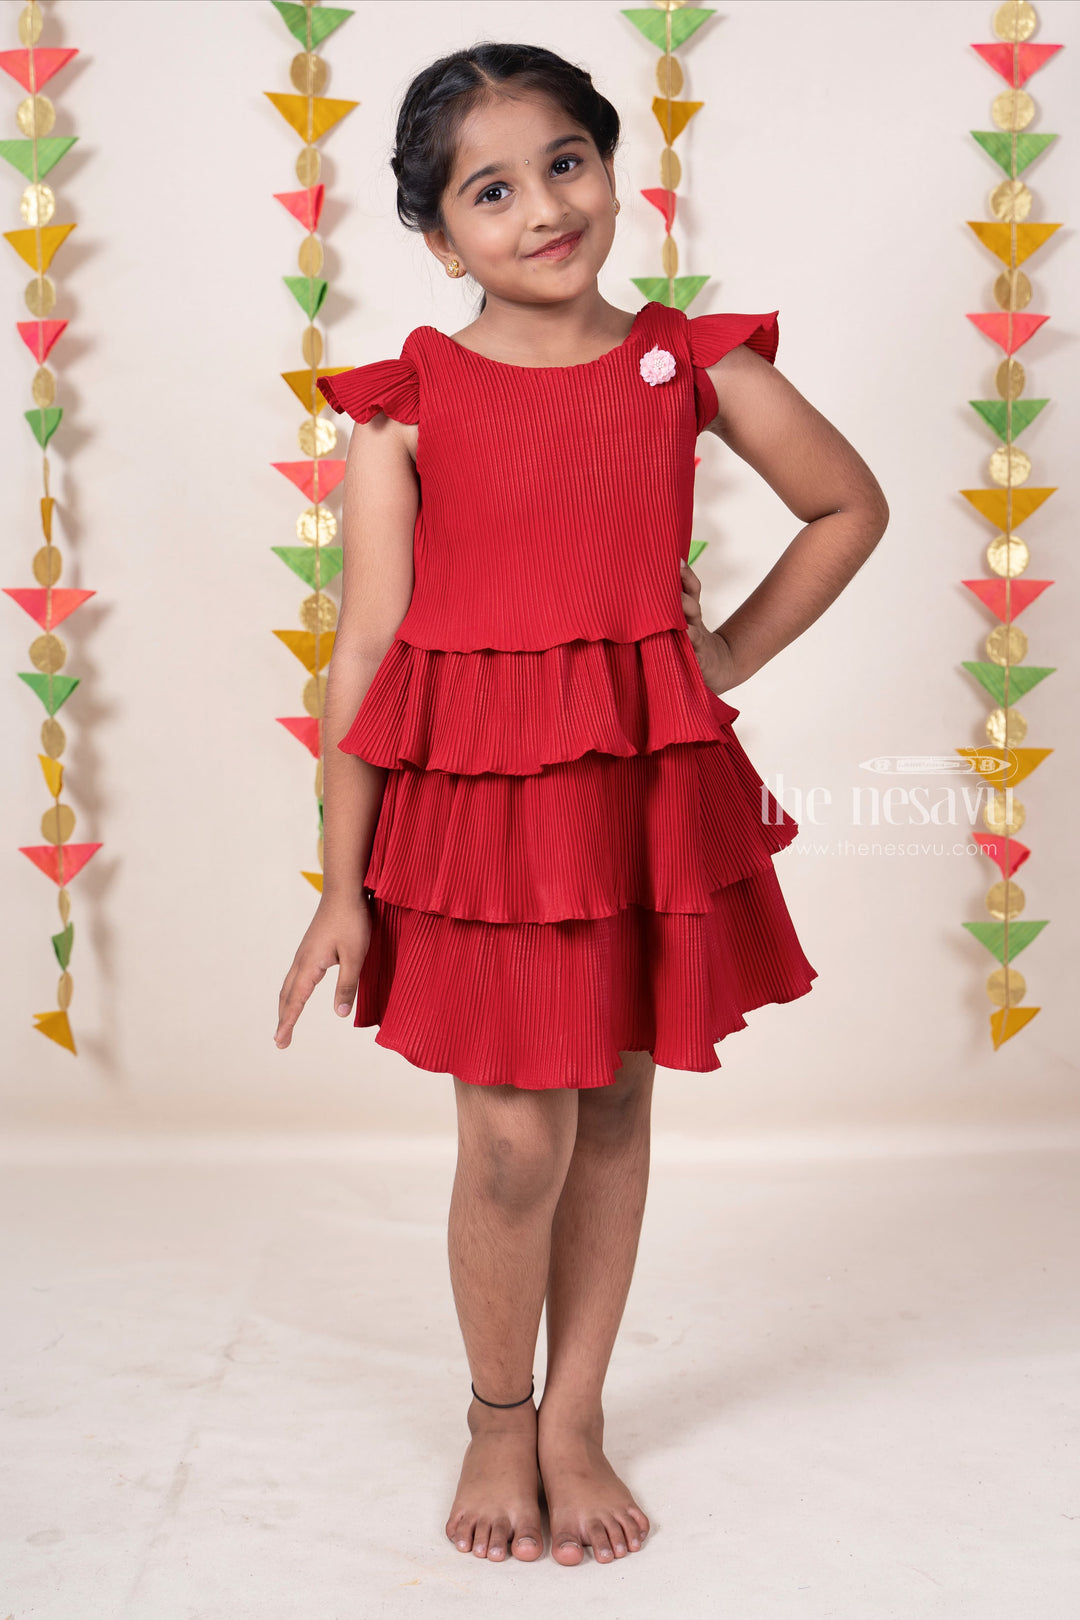 The Nesavu Frocks & Dresses Cherry Red Semi Ruffled Cotton Gown For Baby Girls With Floral Embellishments psr silks Nesavu 16 (1Y) / red GFC898